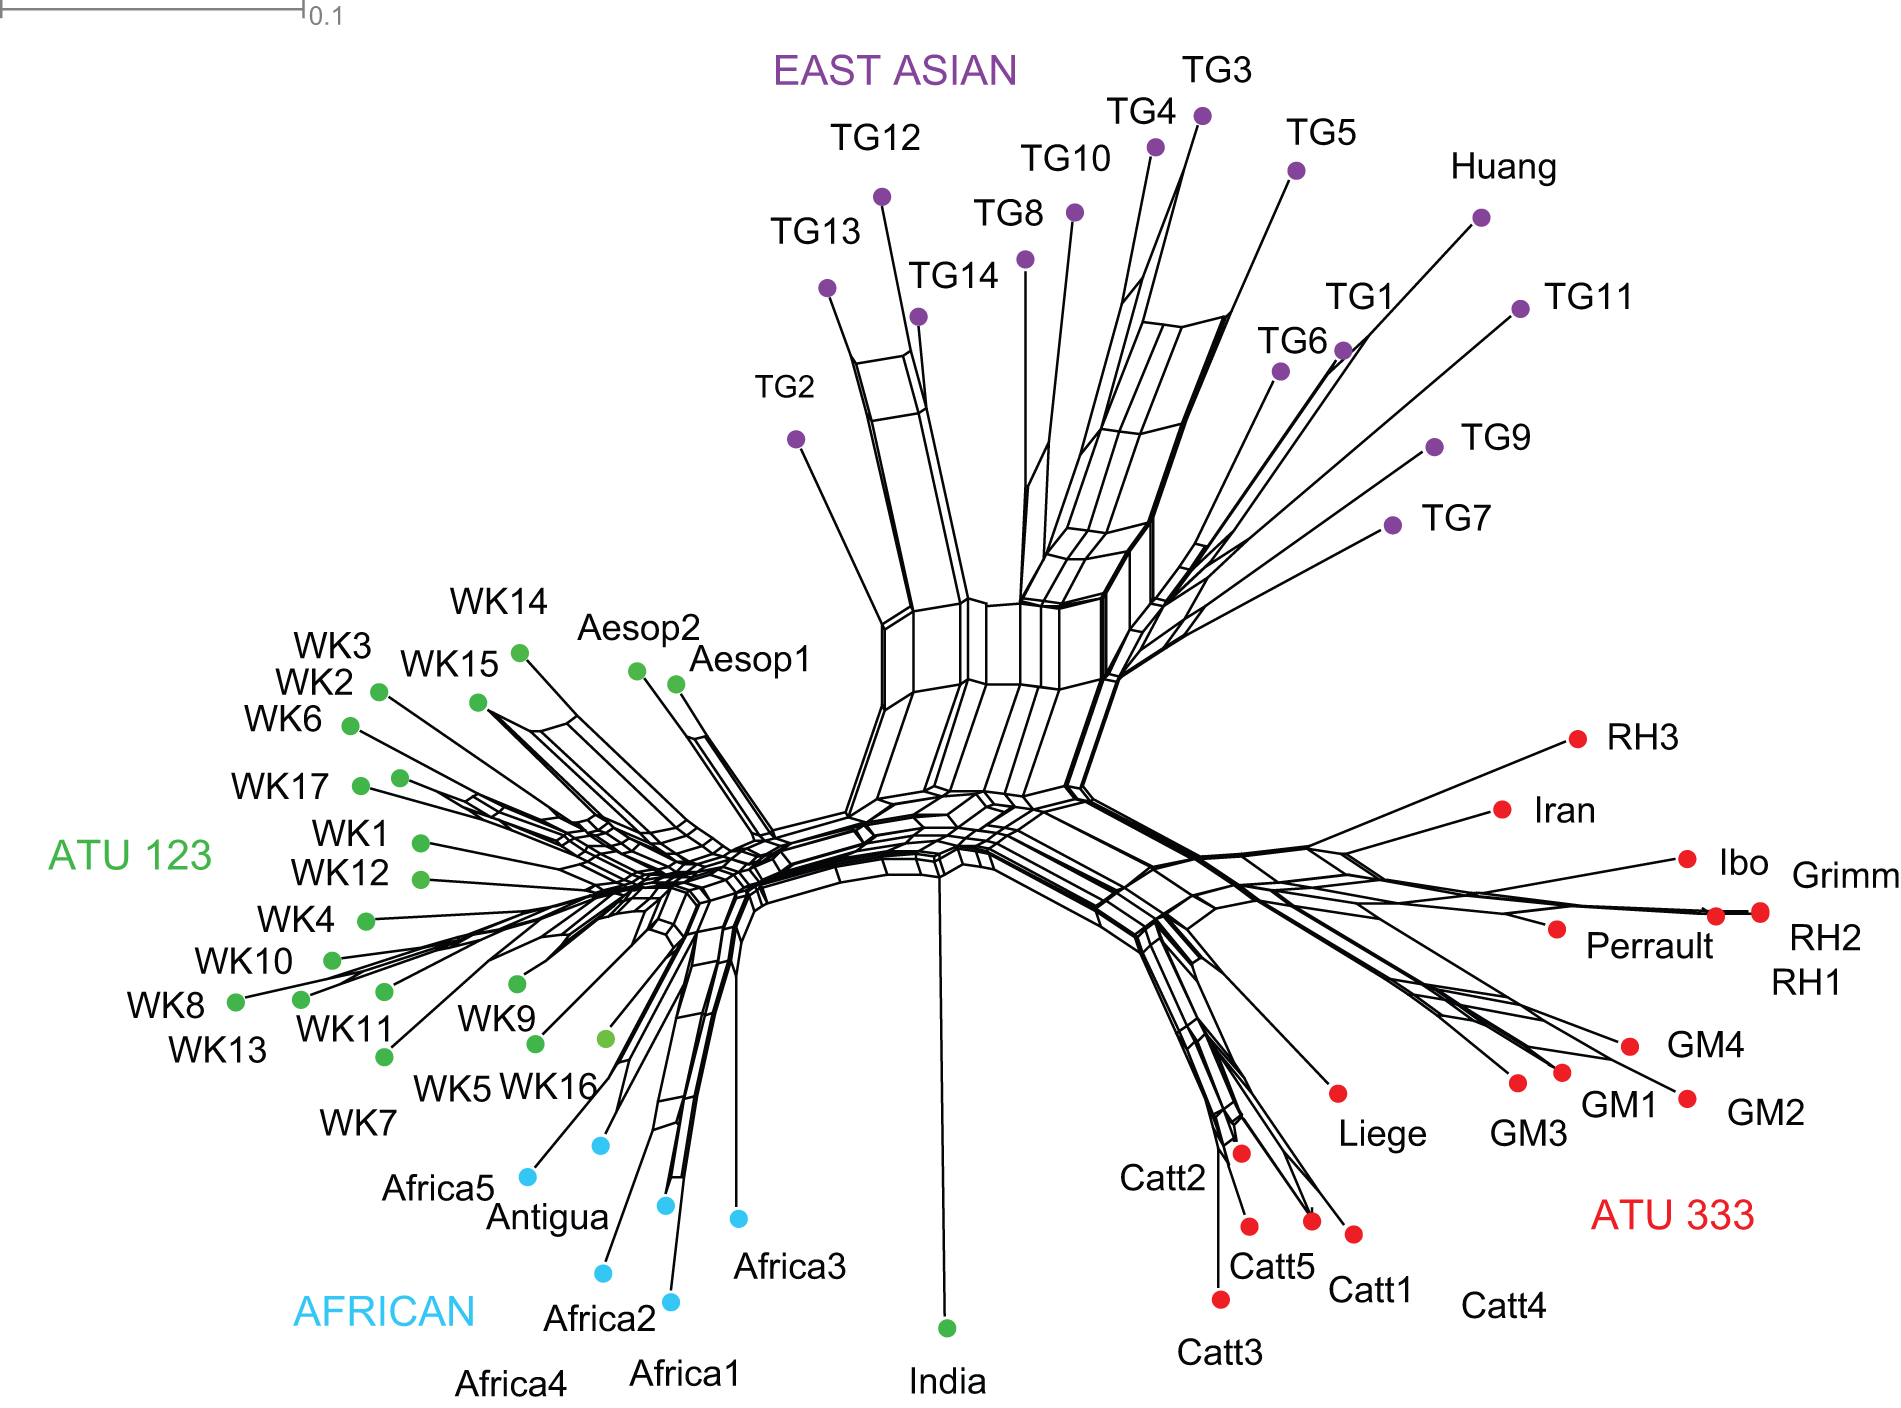 Phylogenetic network of Little Red Riding Hood (Tehrani 2013, fig. 4)